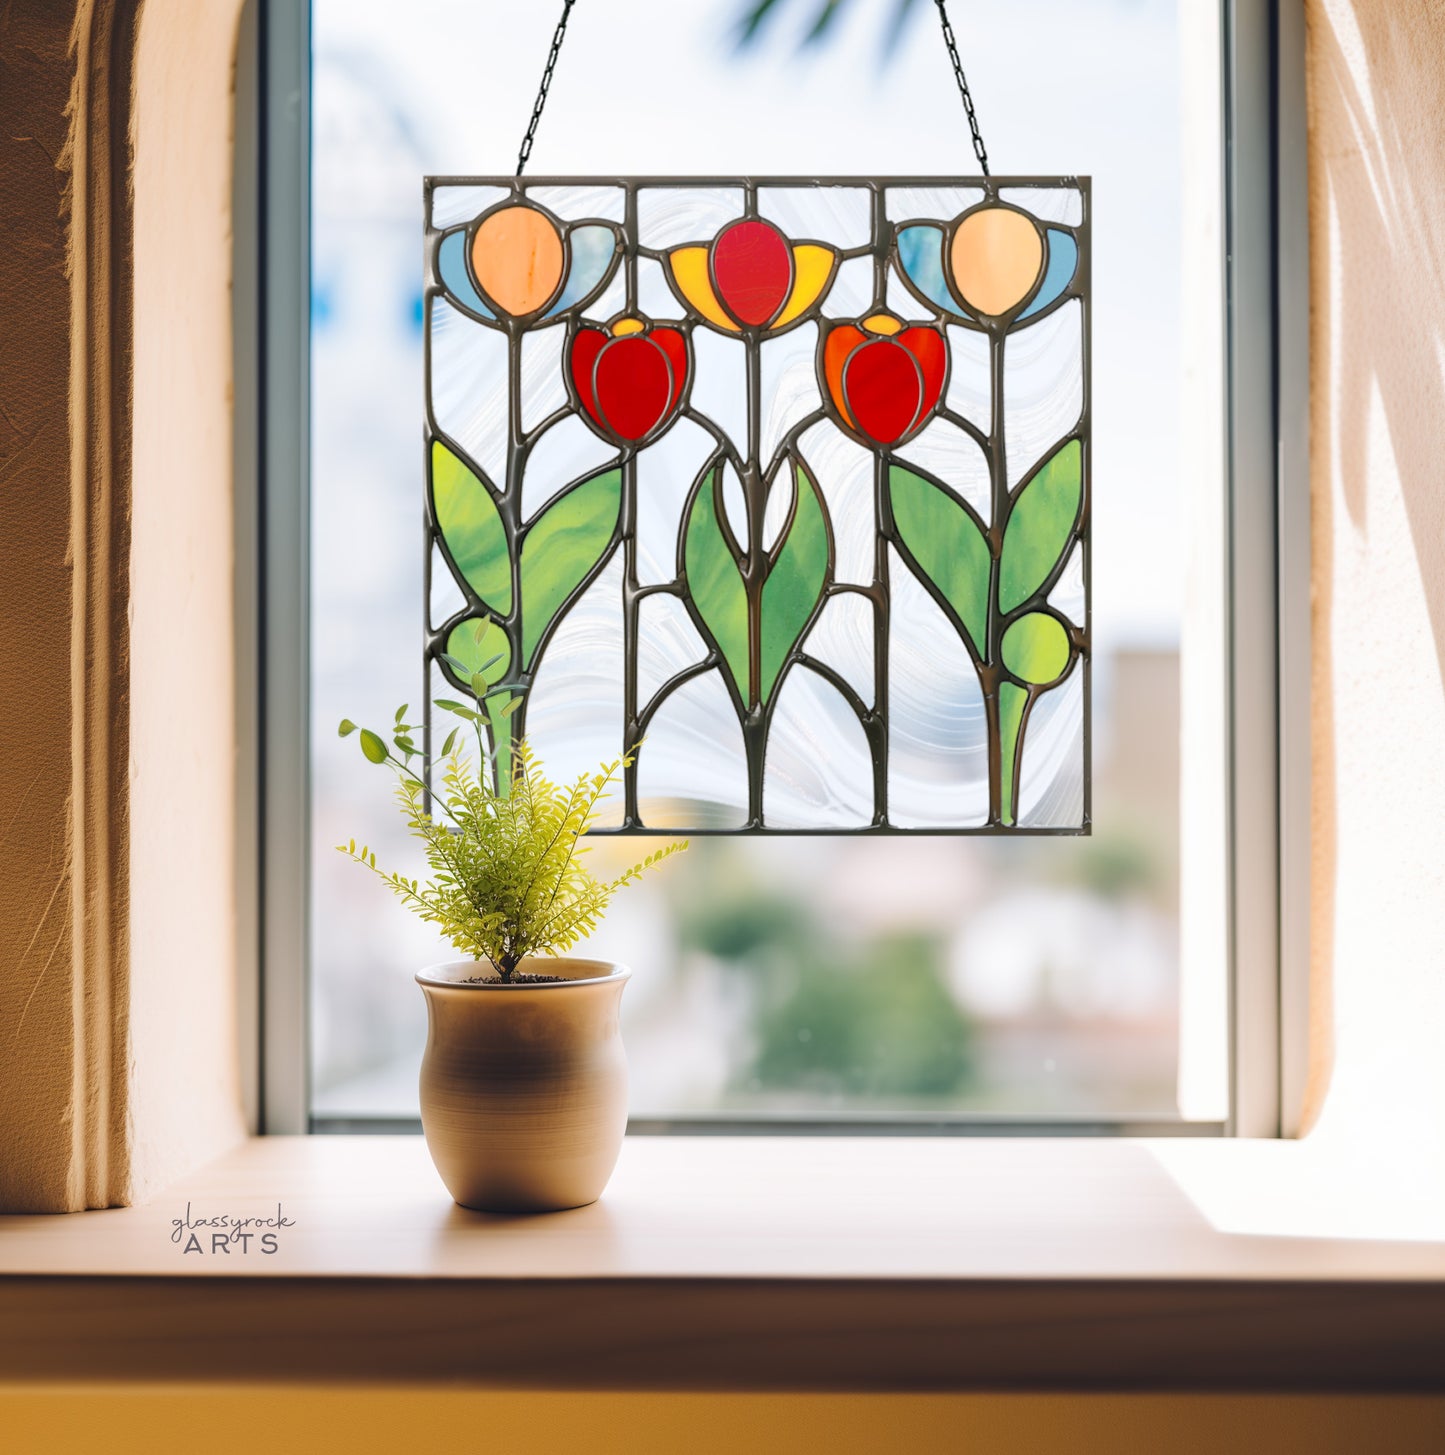 Prairie Tulips Stained Glass Flowers Pattern